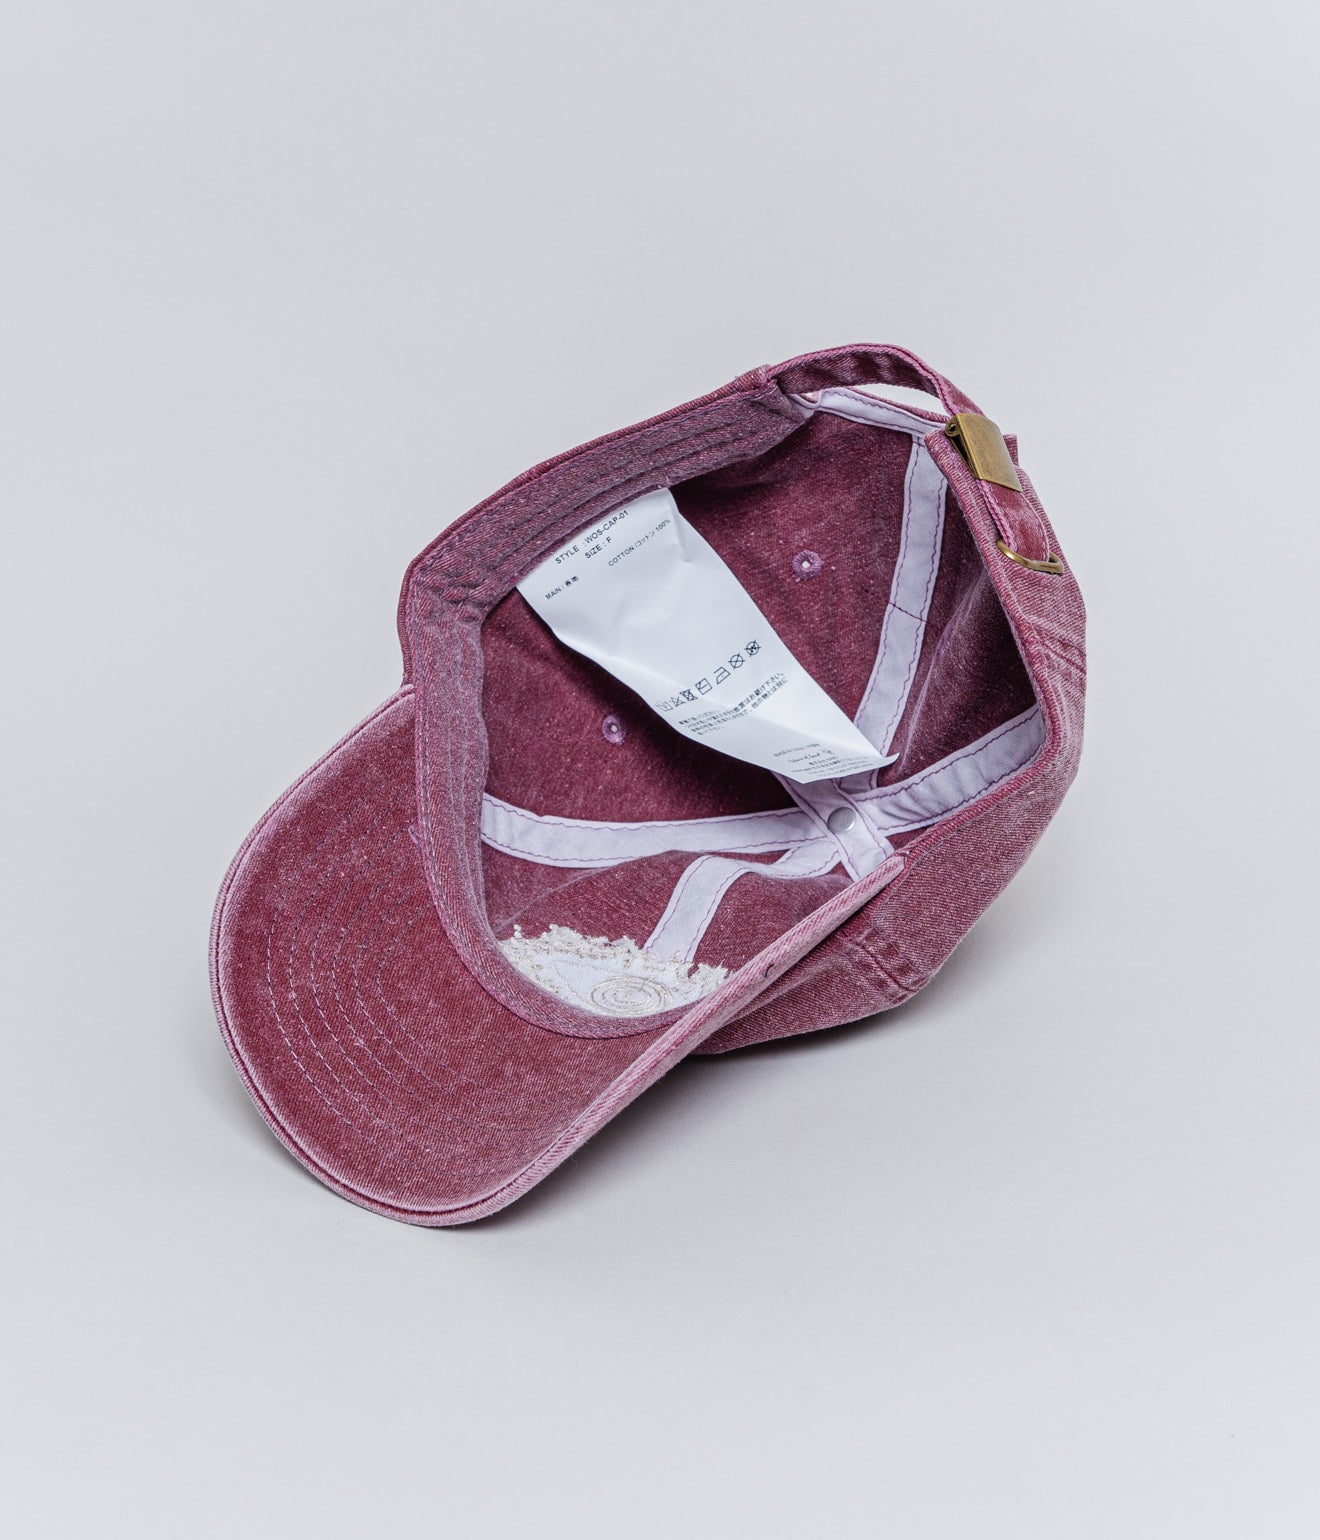 WAVE OF SAND "CAP PIGMENT DYED TWILL" BURGUNDY - WEAREALLANIMALS